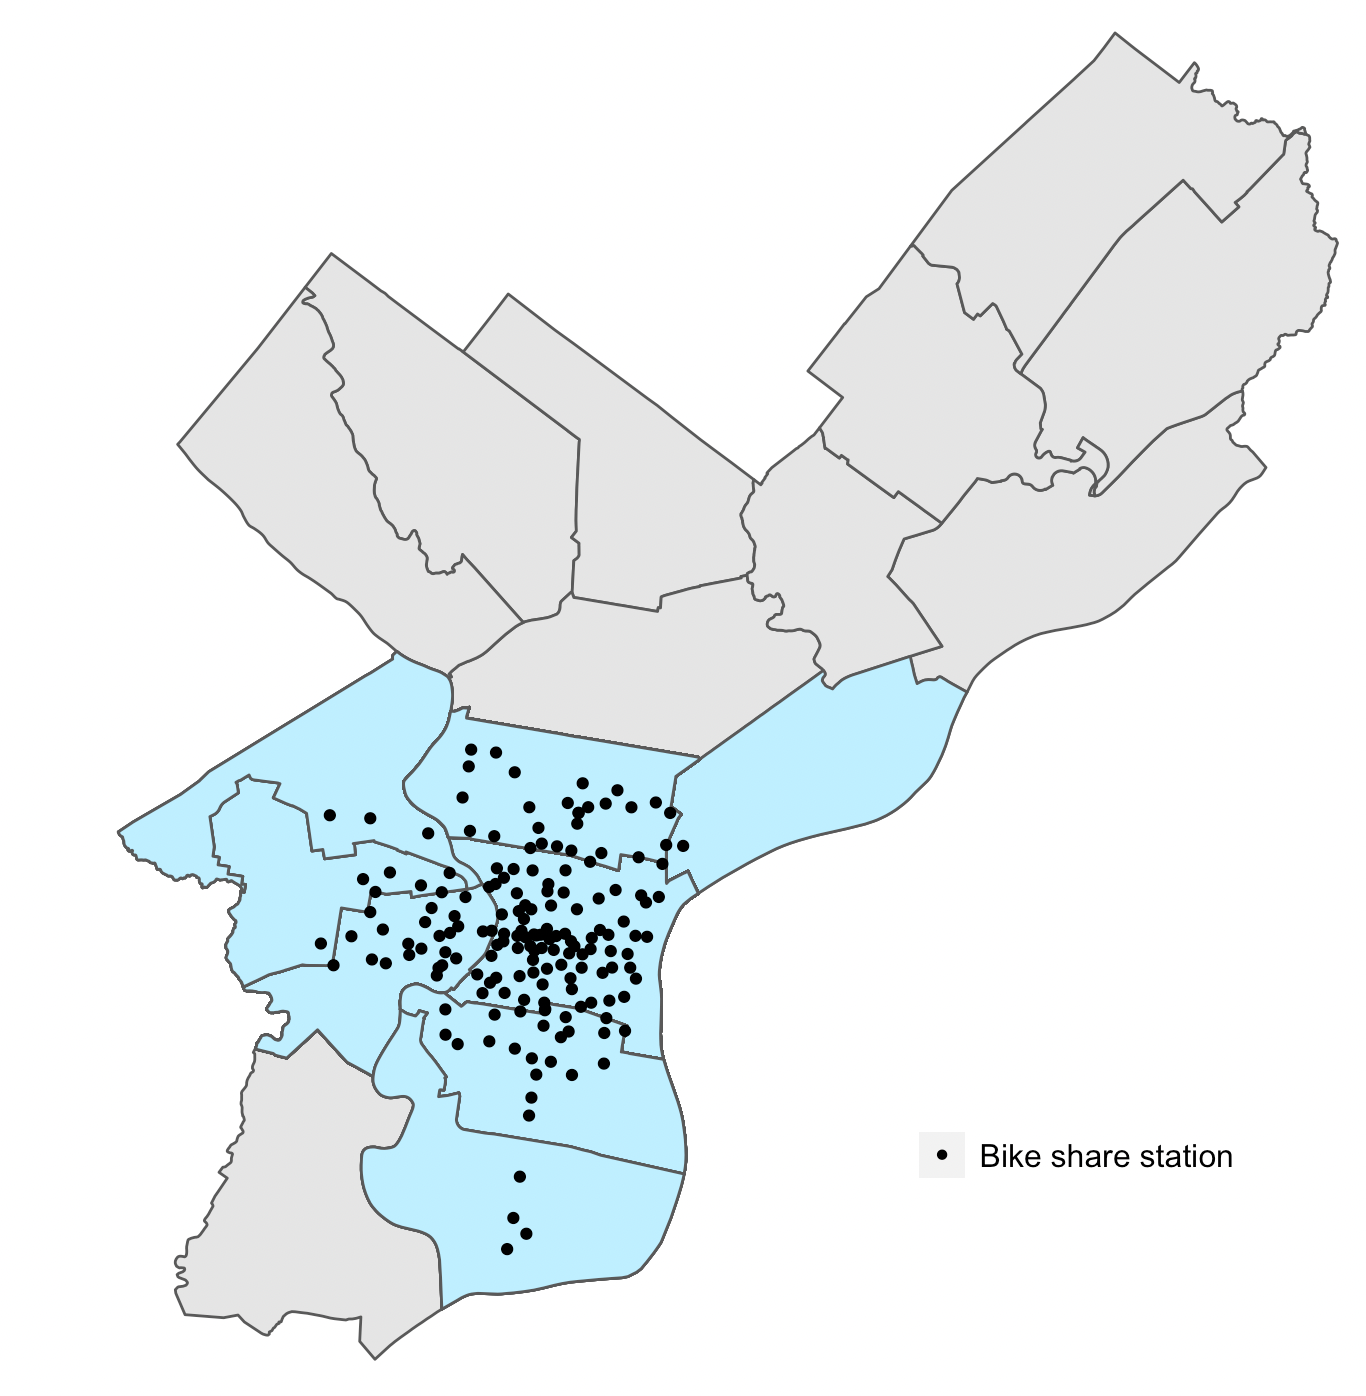 A map of Philadelphia shows Indego bikeshare stations concentrated in Central Philadelphia and neighboring planning districts